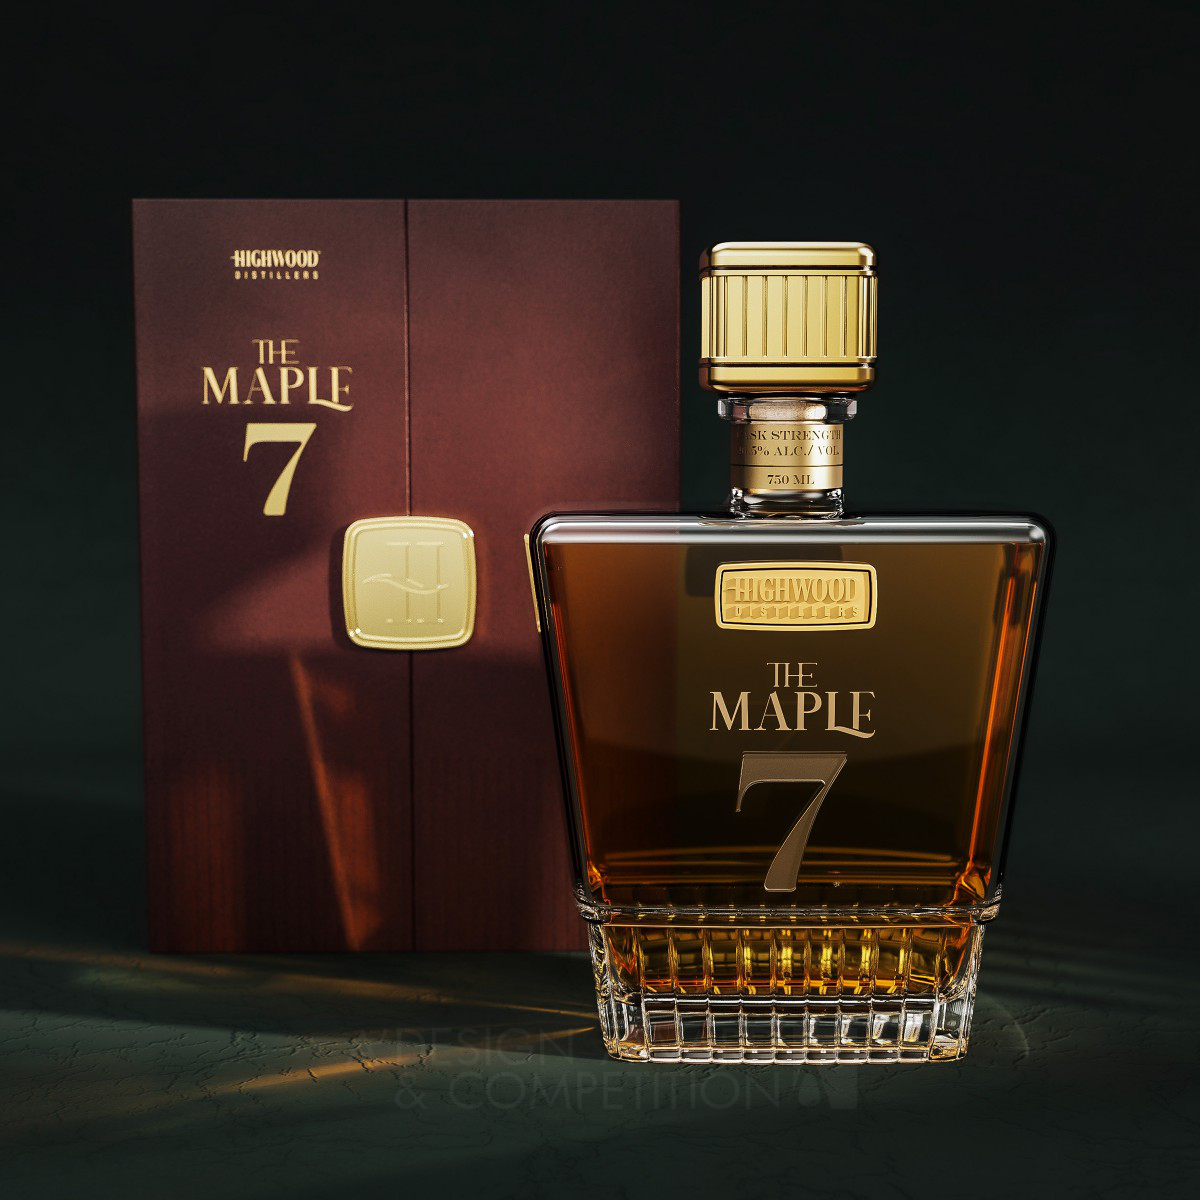 Tiago Russo wins Silver at the prestigious A' Packaging Design Award with The Maple 7 Canadian Rye Whisky.